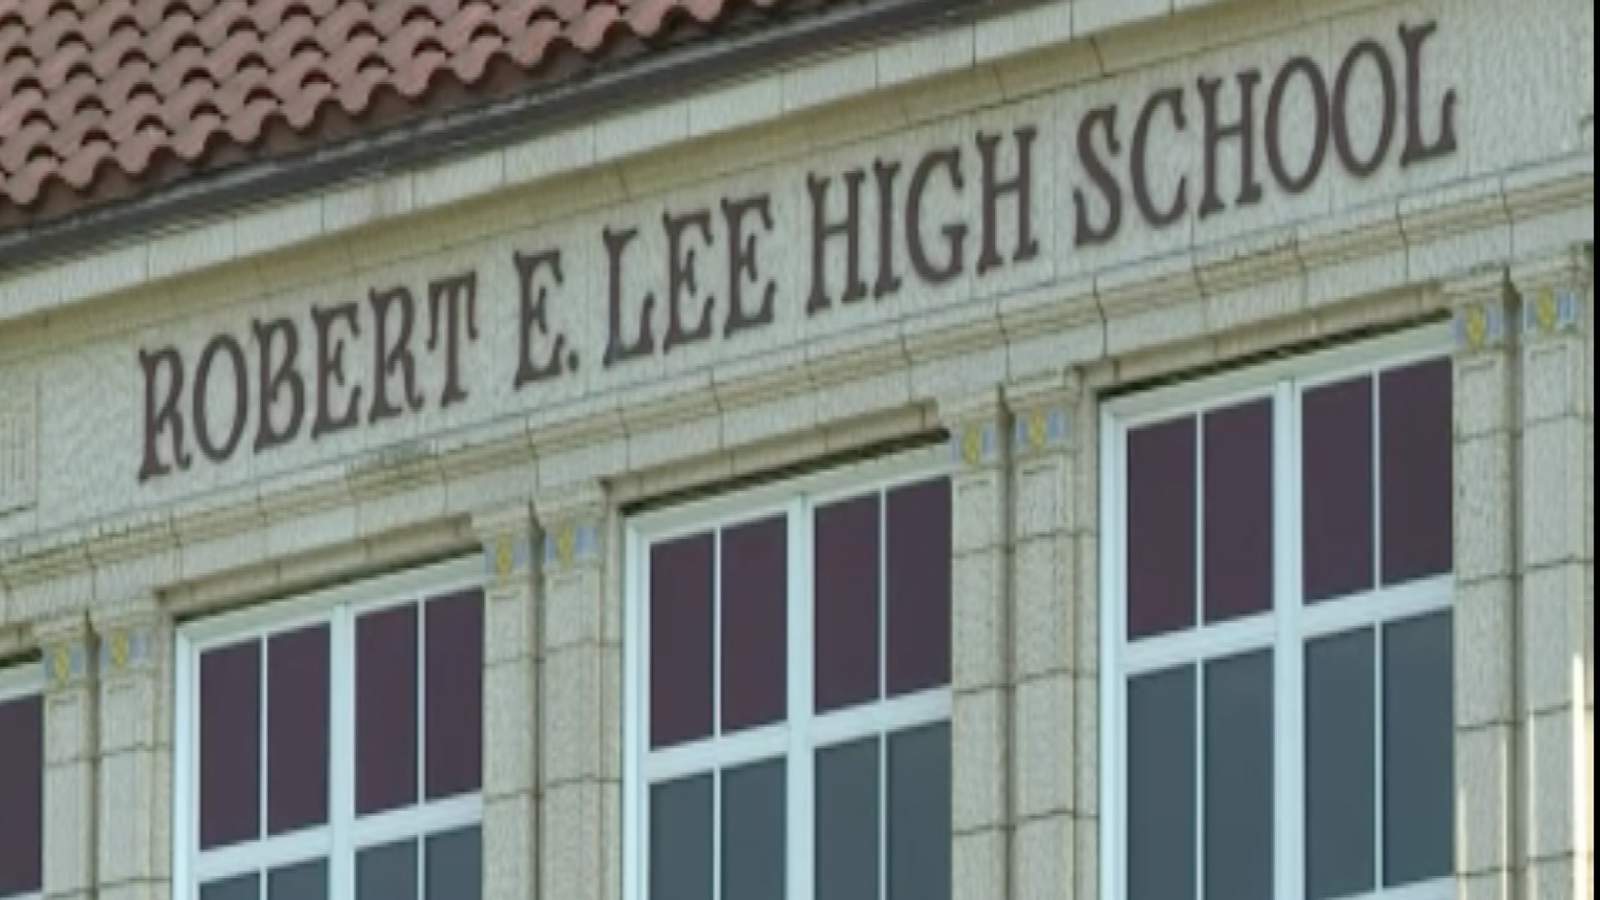 Robert E. Lee High School in Baytown will keep its name for now, board decides